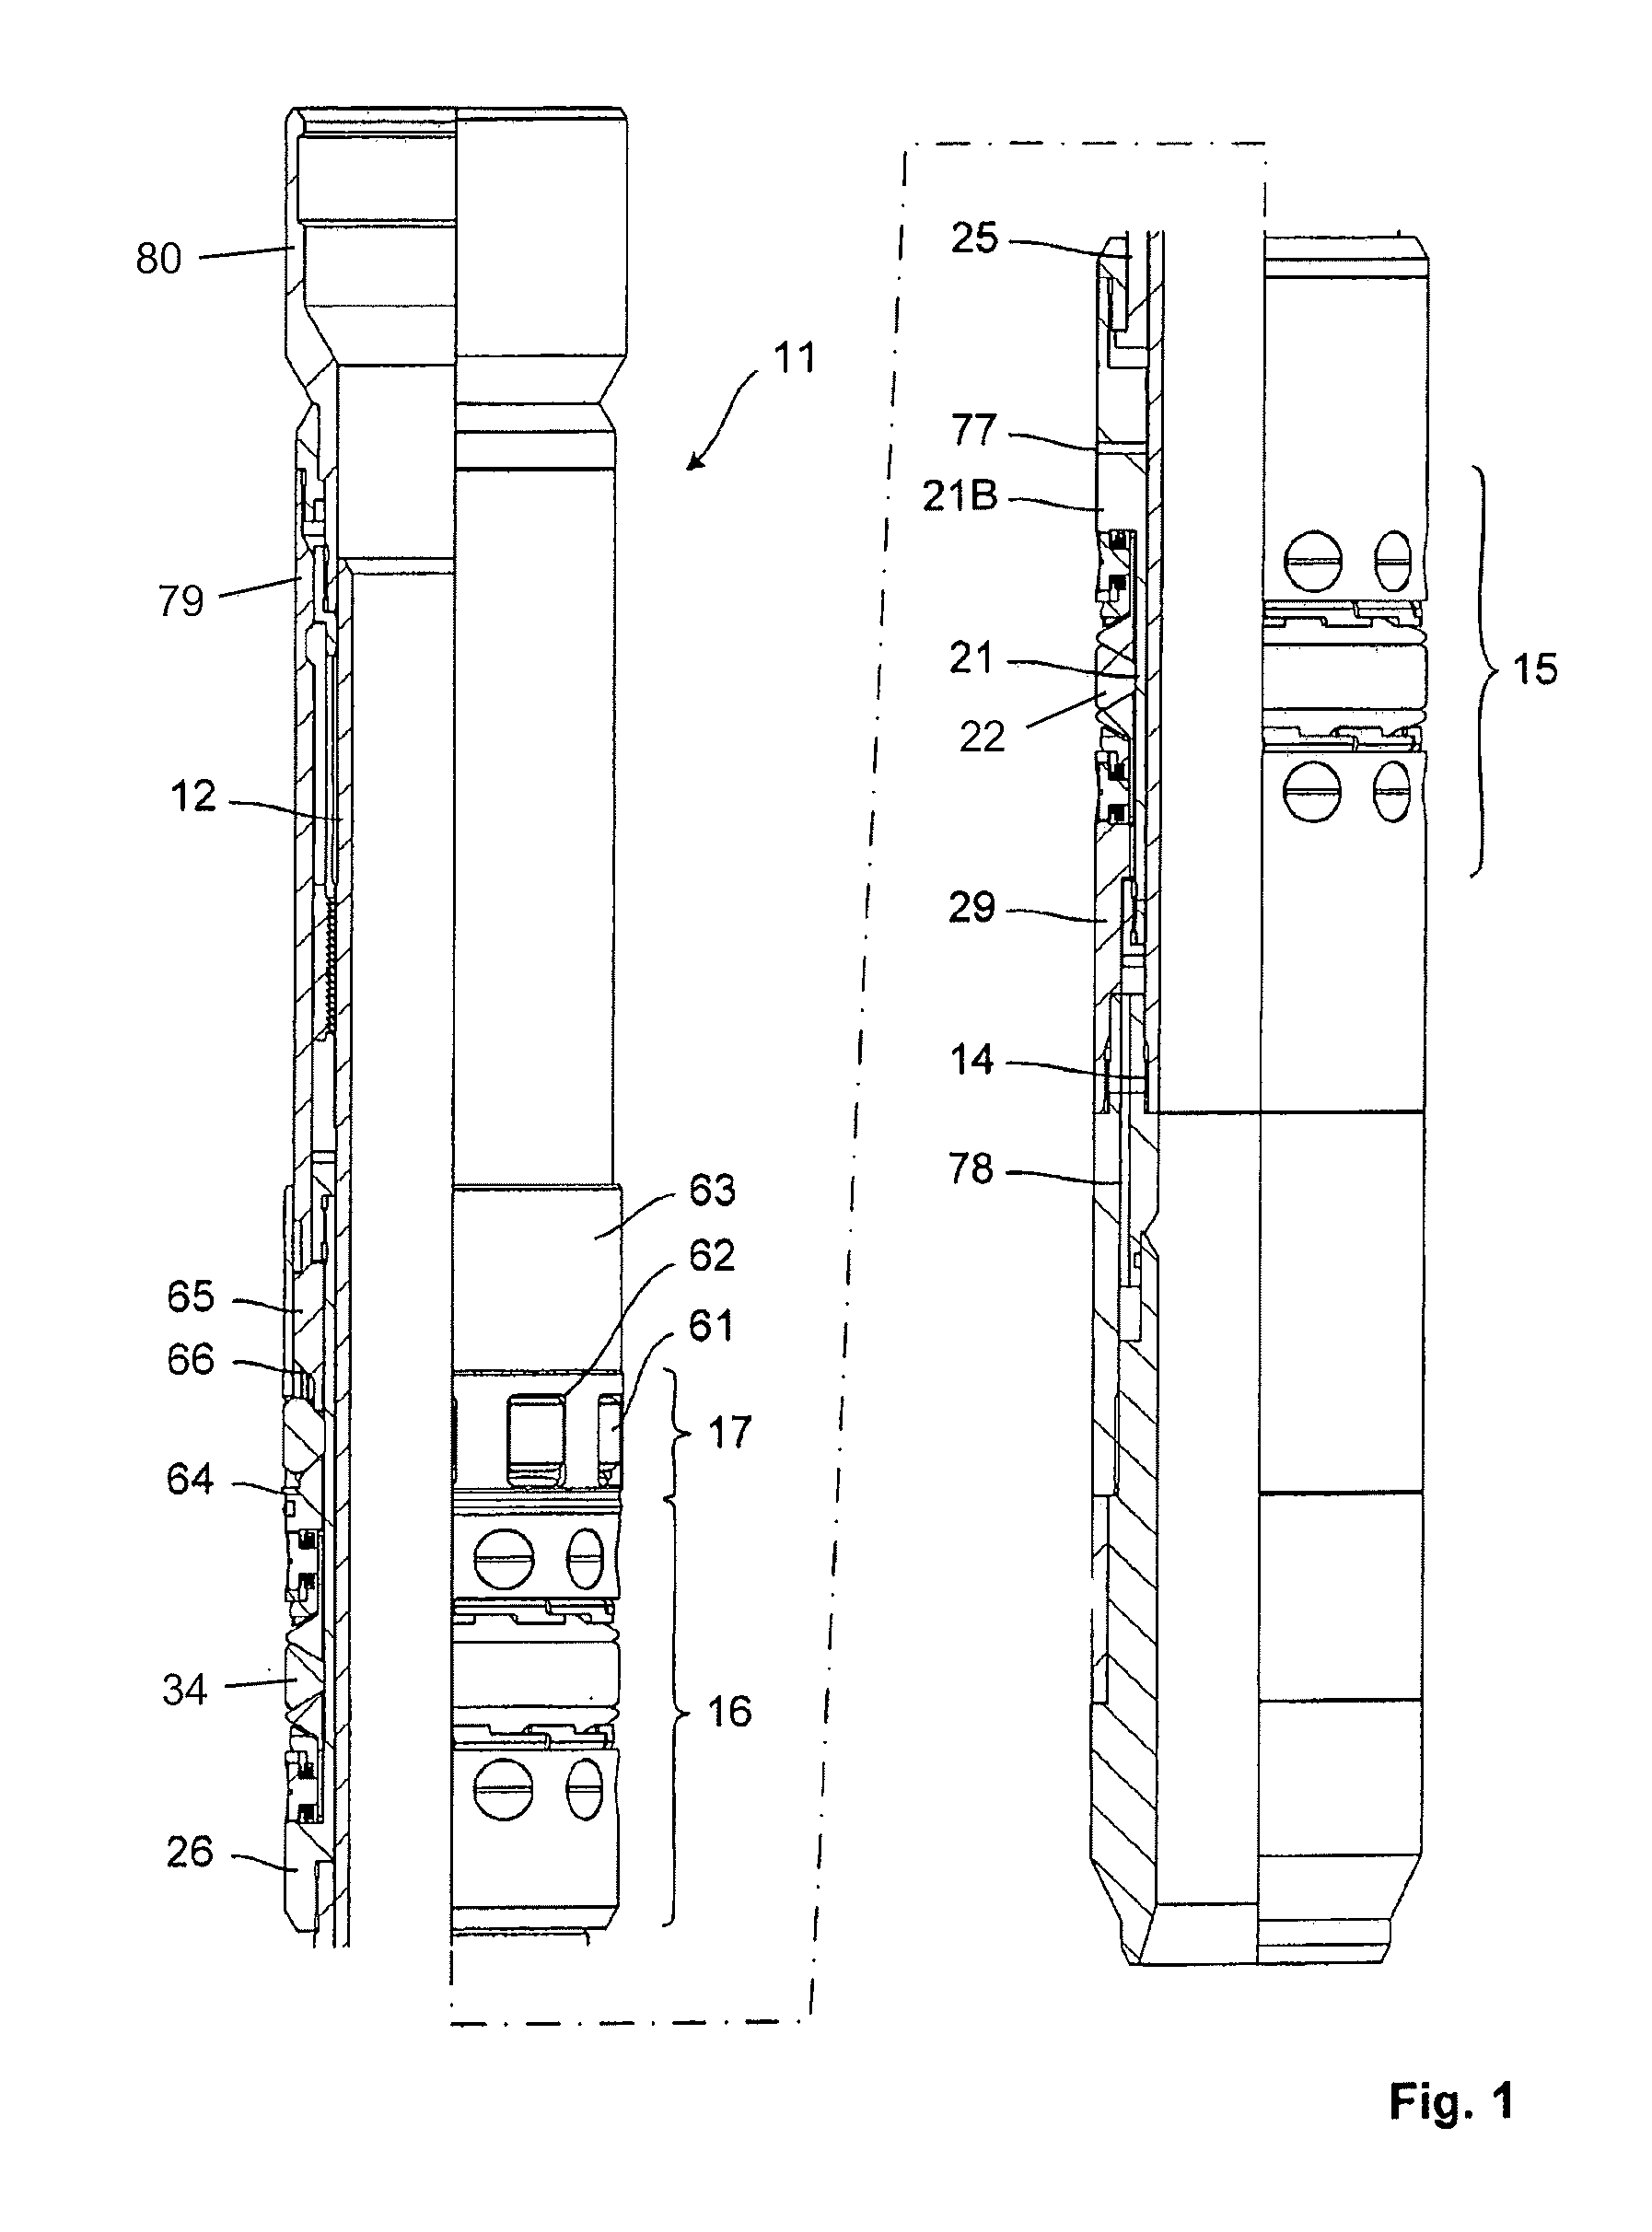 Device for carrying a replacement safety valve in a well tube